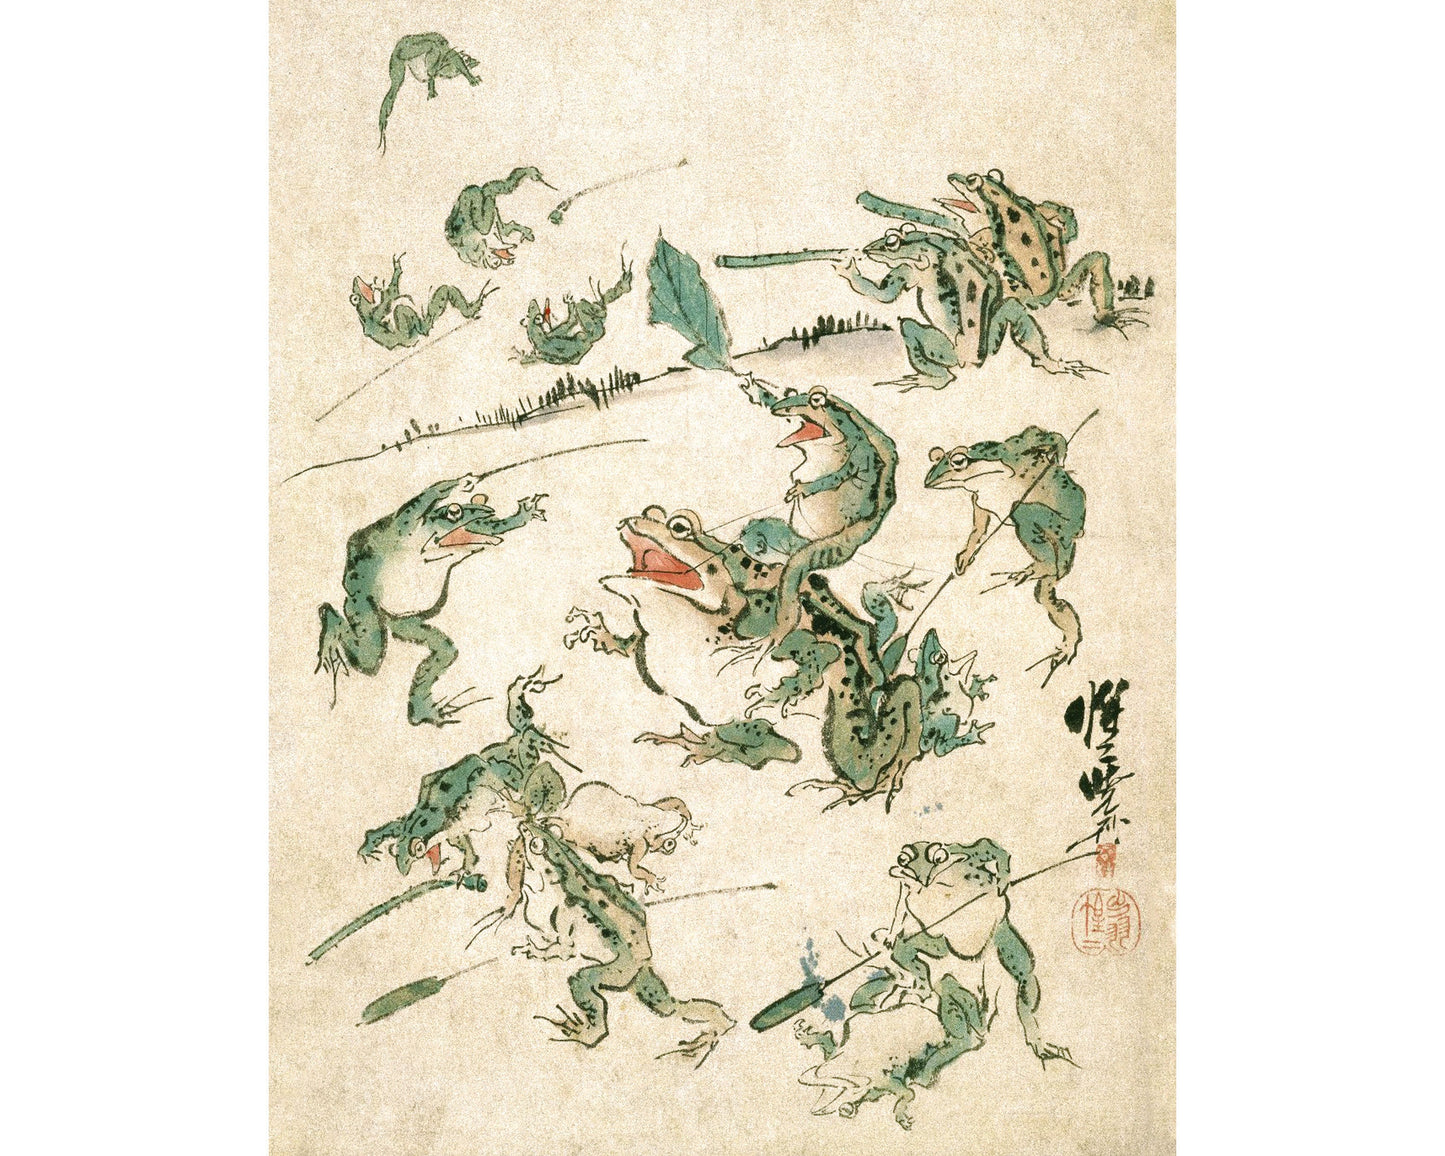 Vintage frog art | Battle of the frogs | Kawanabe Kyosai sketch | 19th century Asian art | Water, swamp animal | Modern vintage décor